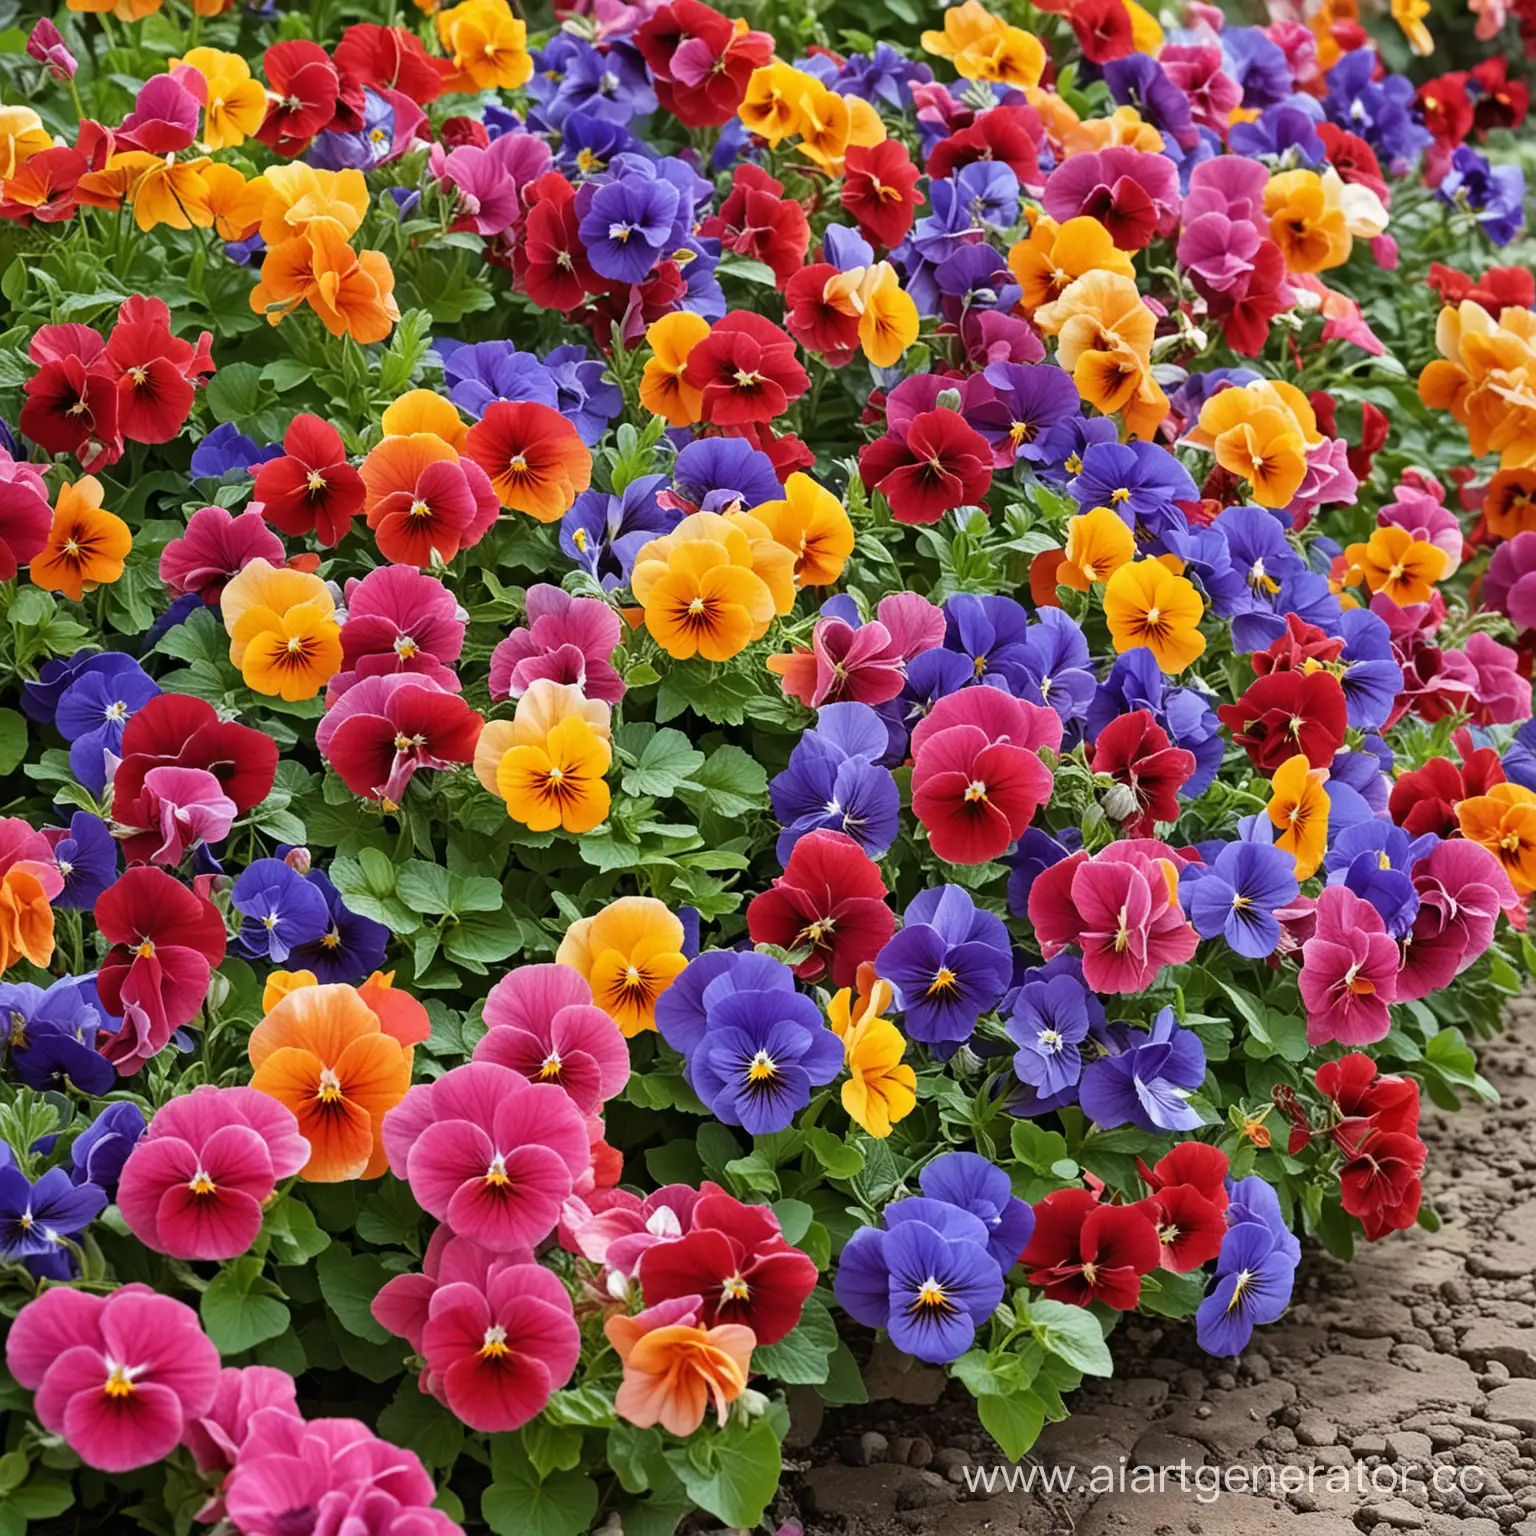 Tropical-Paradise-Flower-Bed-with-Vibrant-Pansies-Begonias-and-Petunias